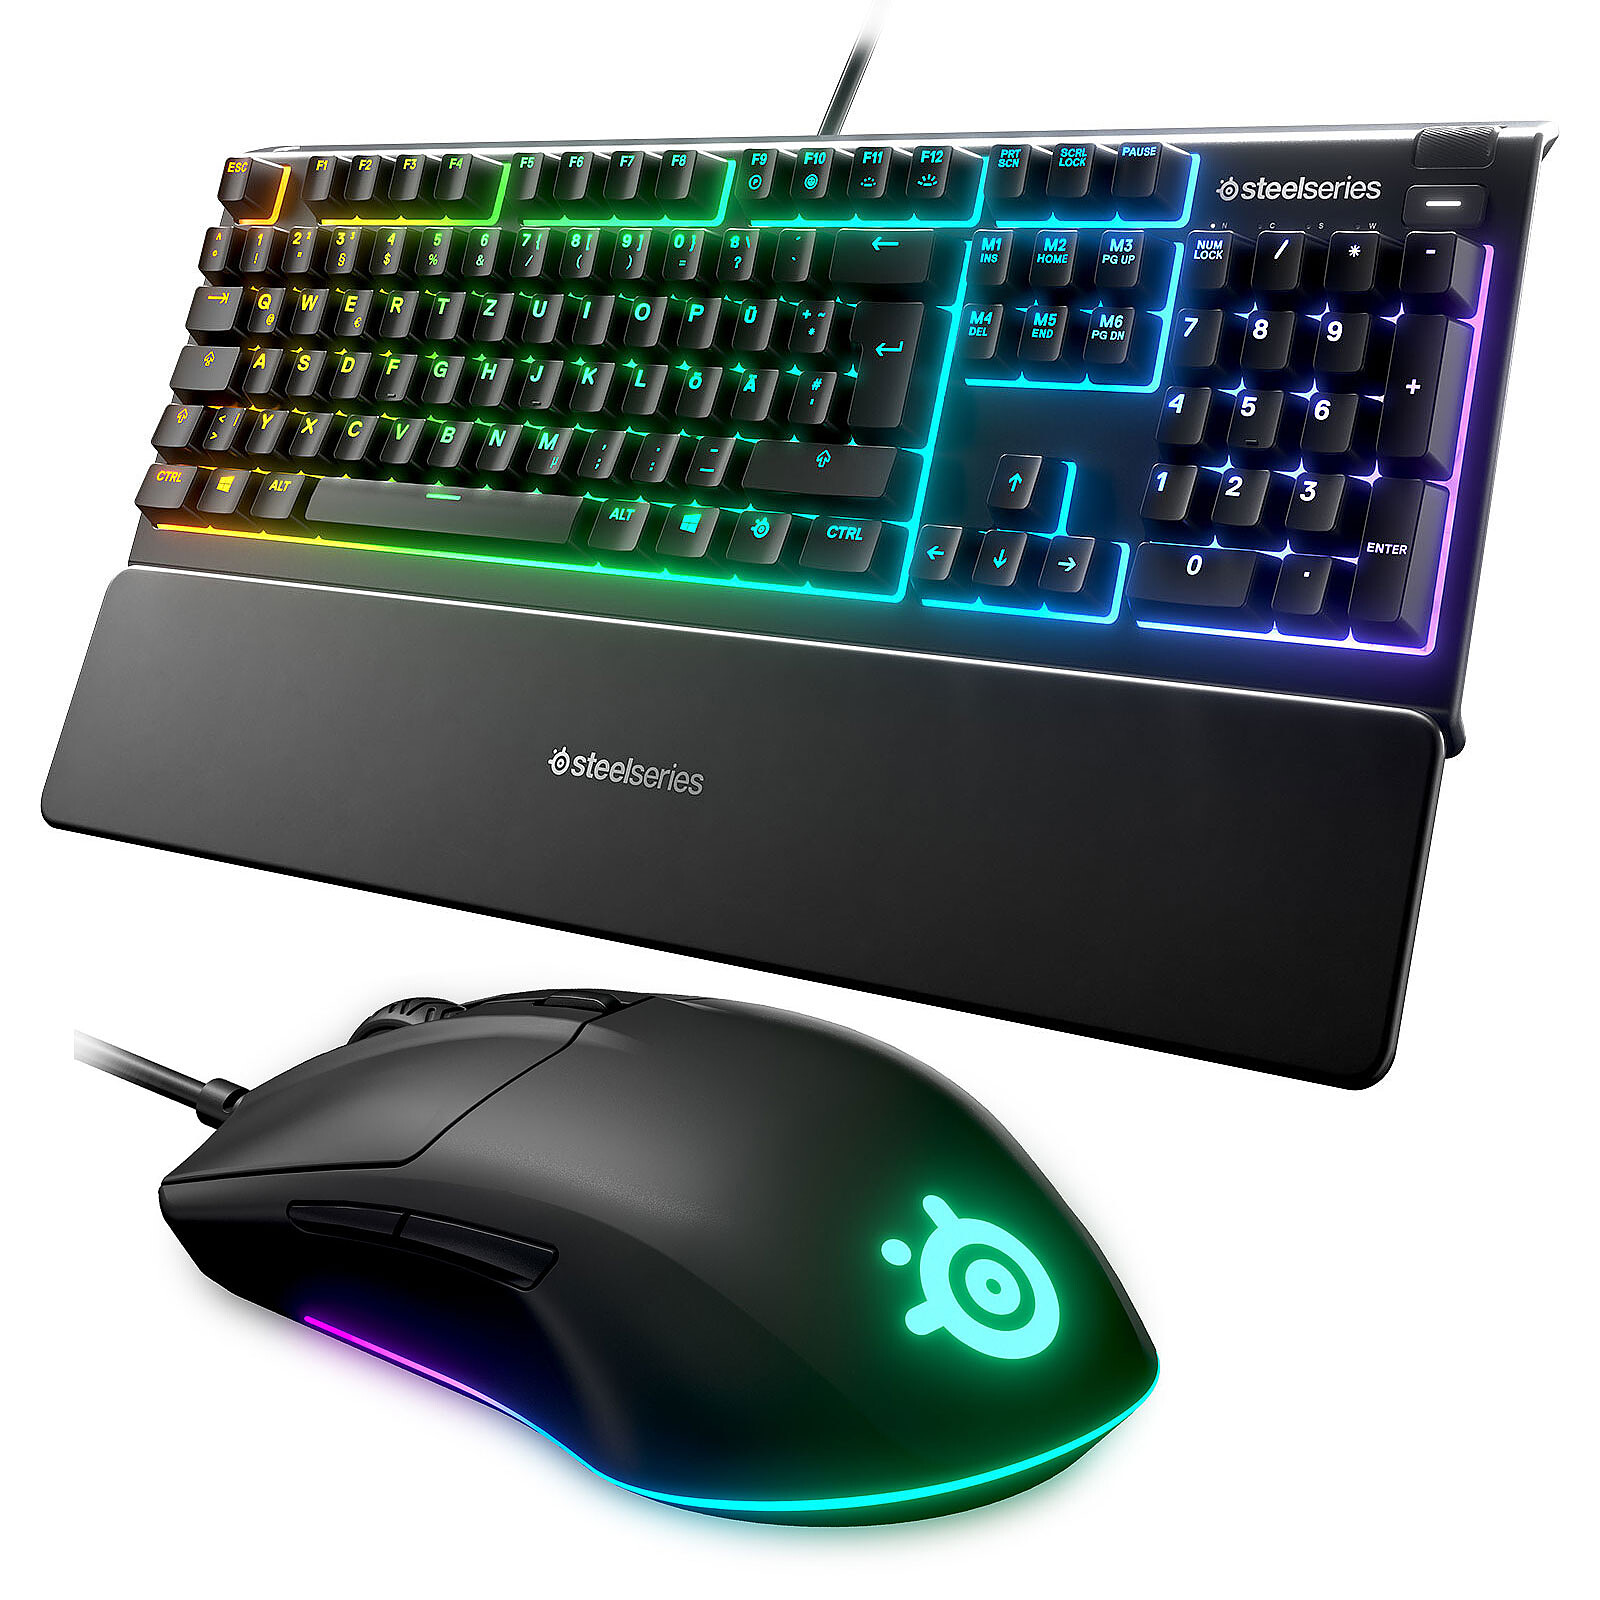 Steelseries Combo 3 Apex 3 Rival 3 Keyboard Mouse Set Steelseries On Ldlc